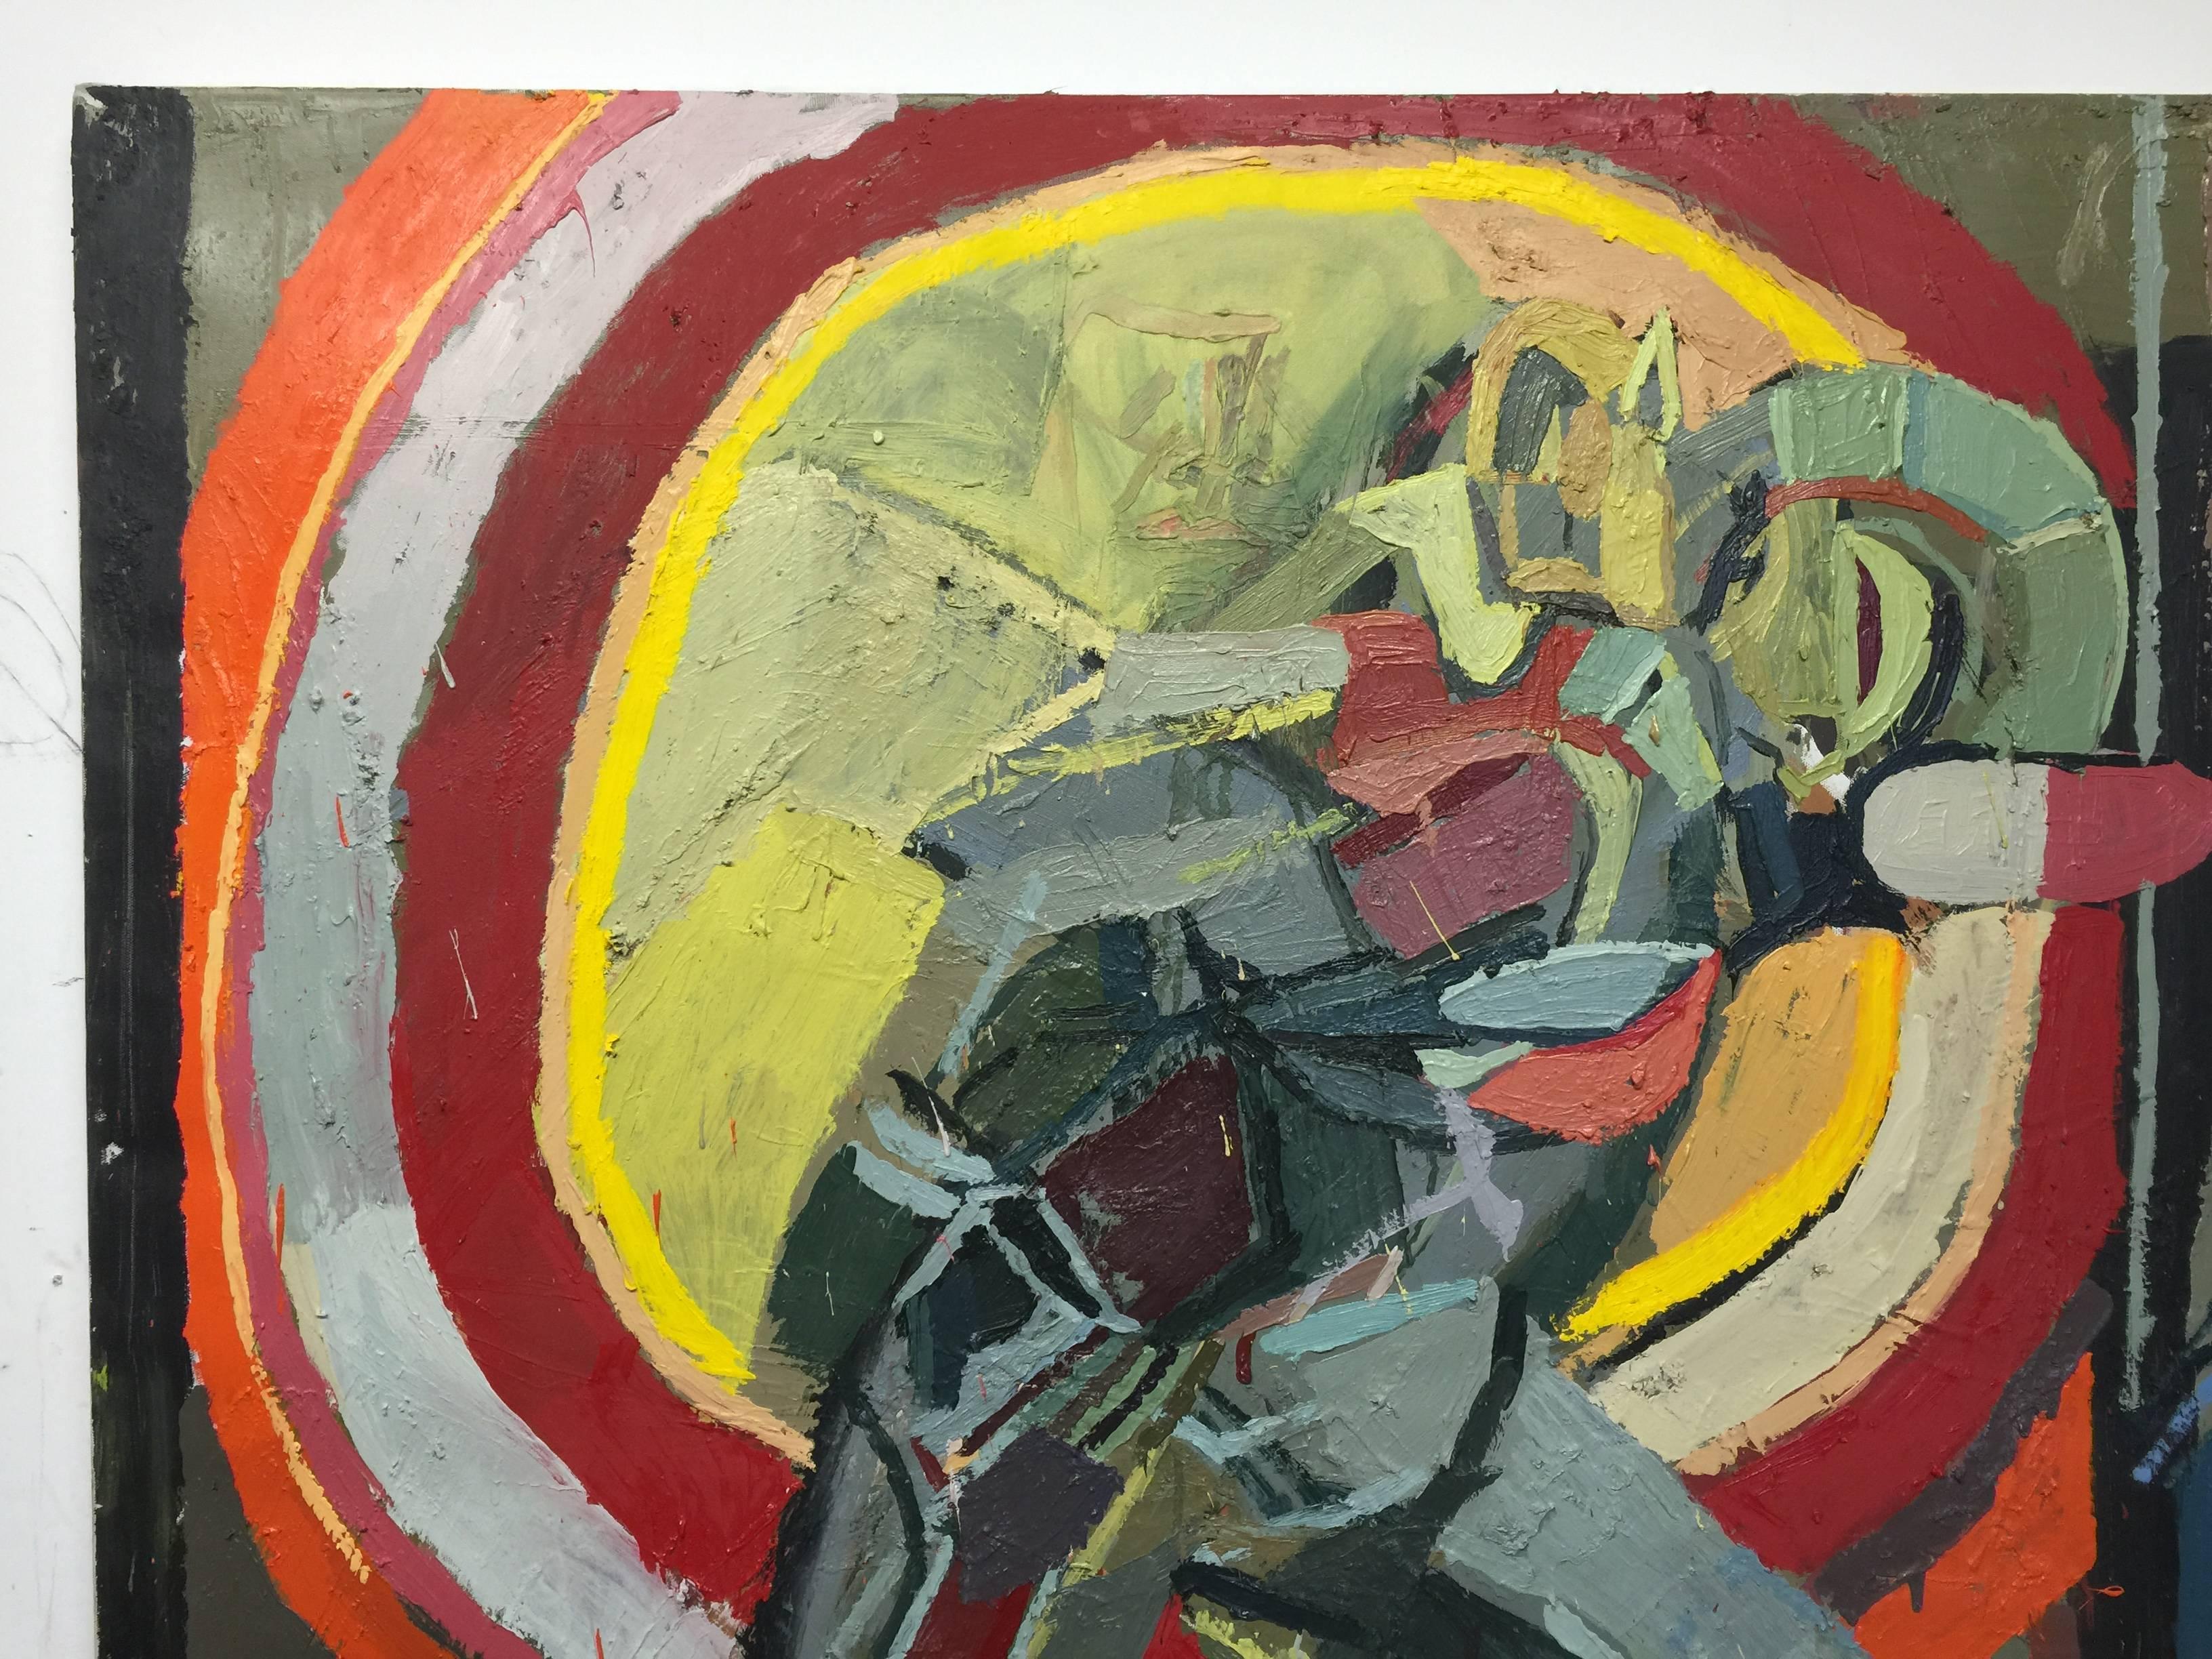 This was the first painting I dealt with Ant Man and just playing around with the shapes - what the pill forms do to the painting - the space of the painting. And then the atom being there like a planet. Makes me feel like there are planets inside